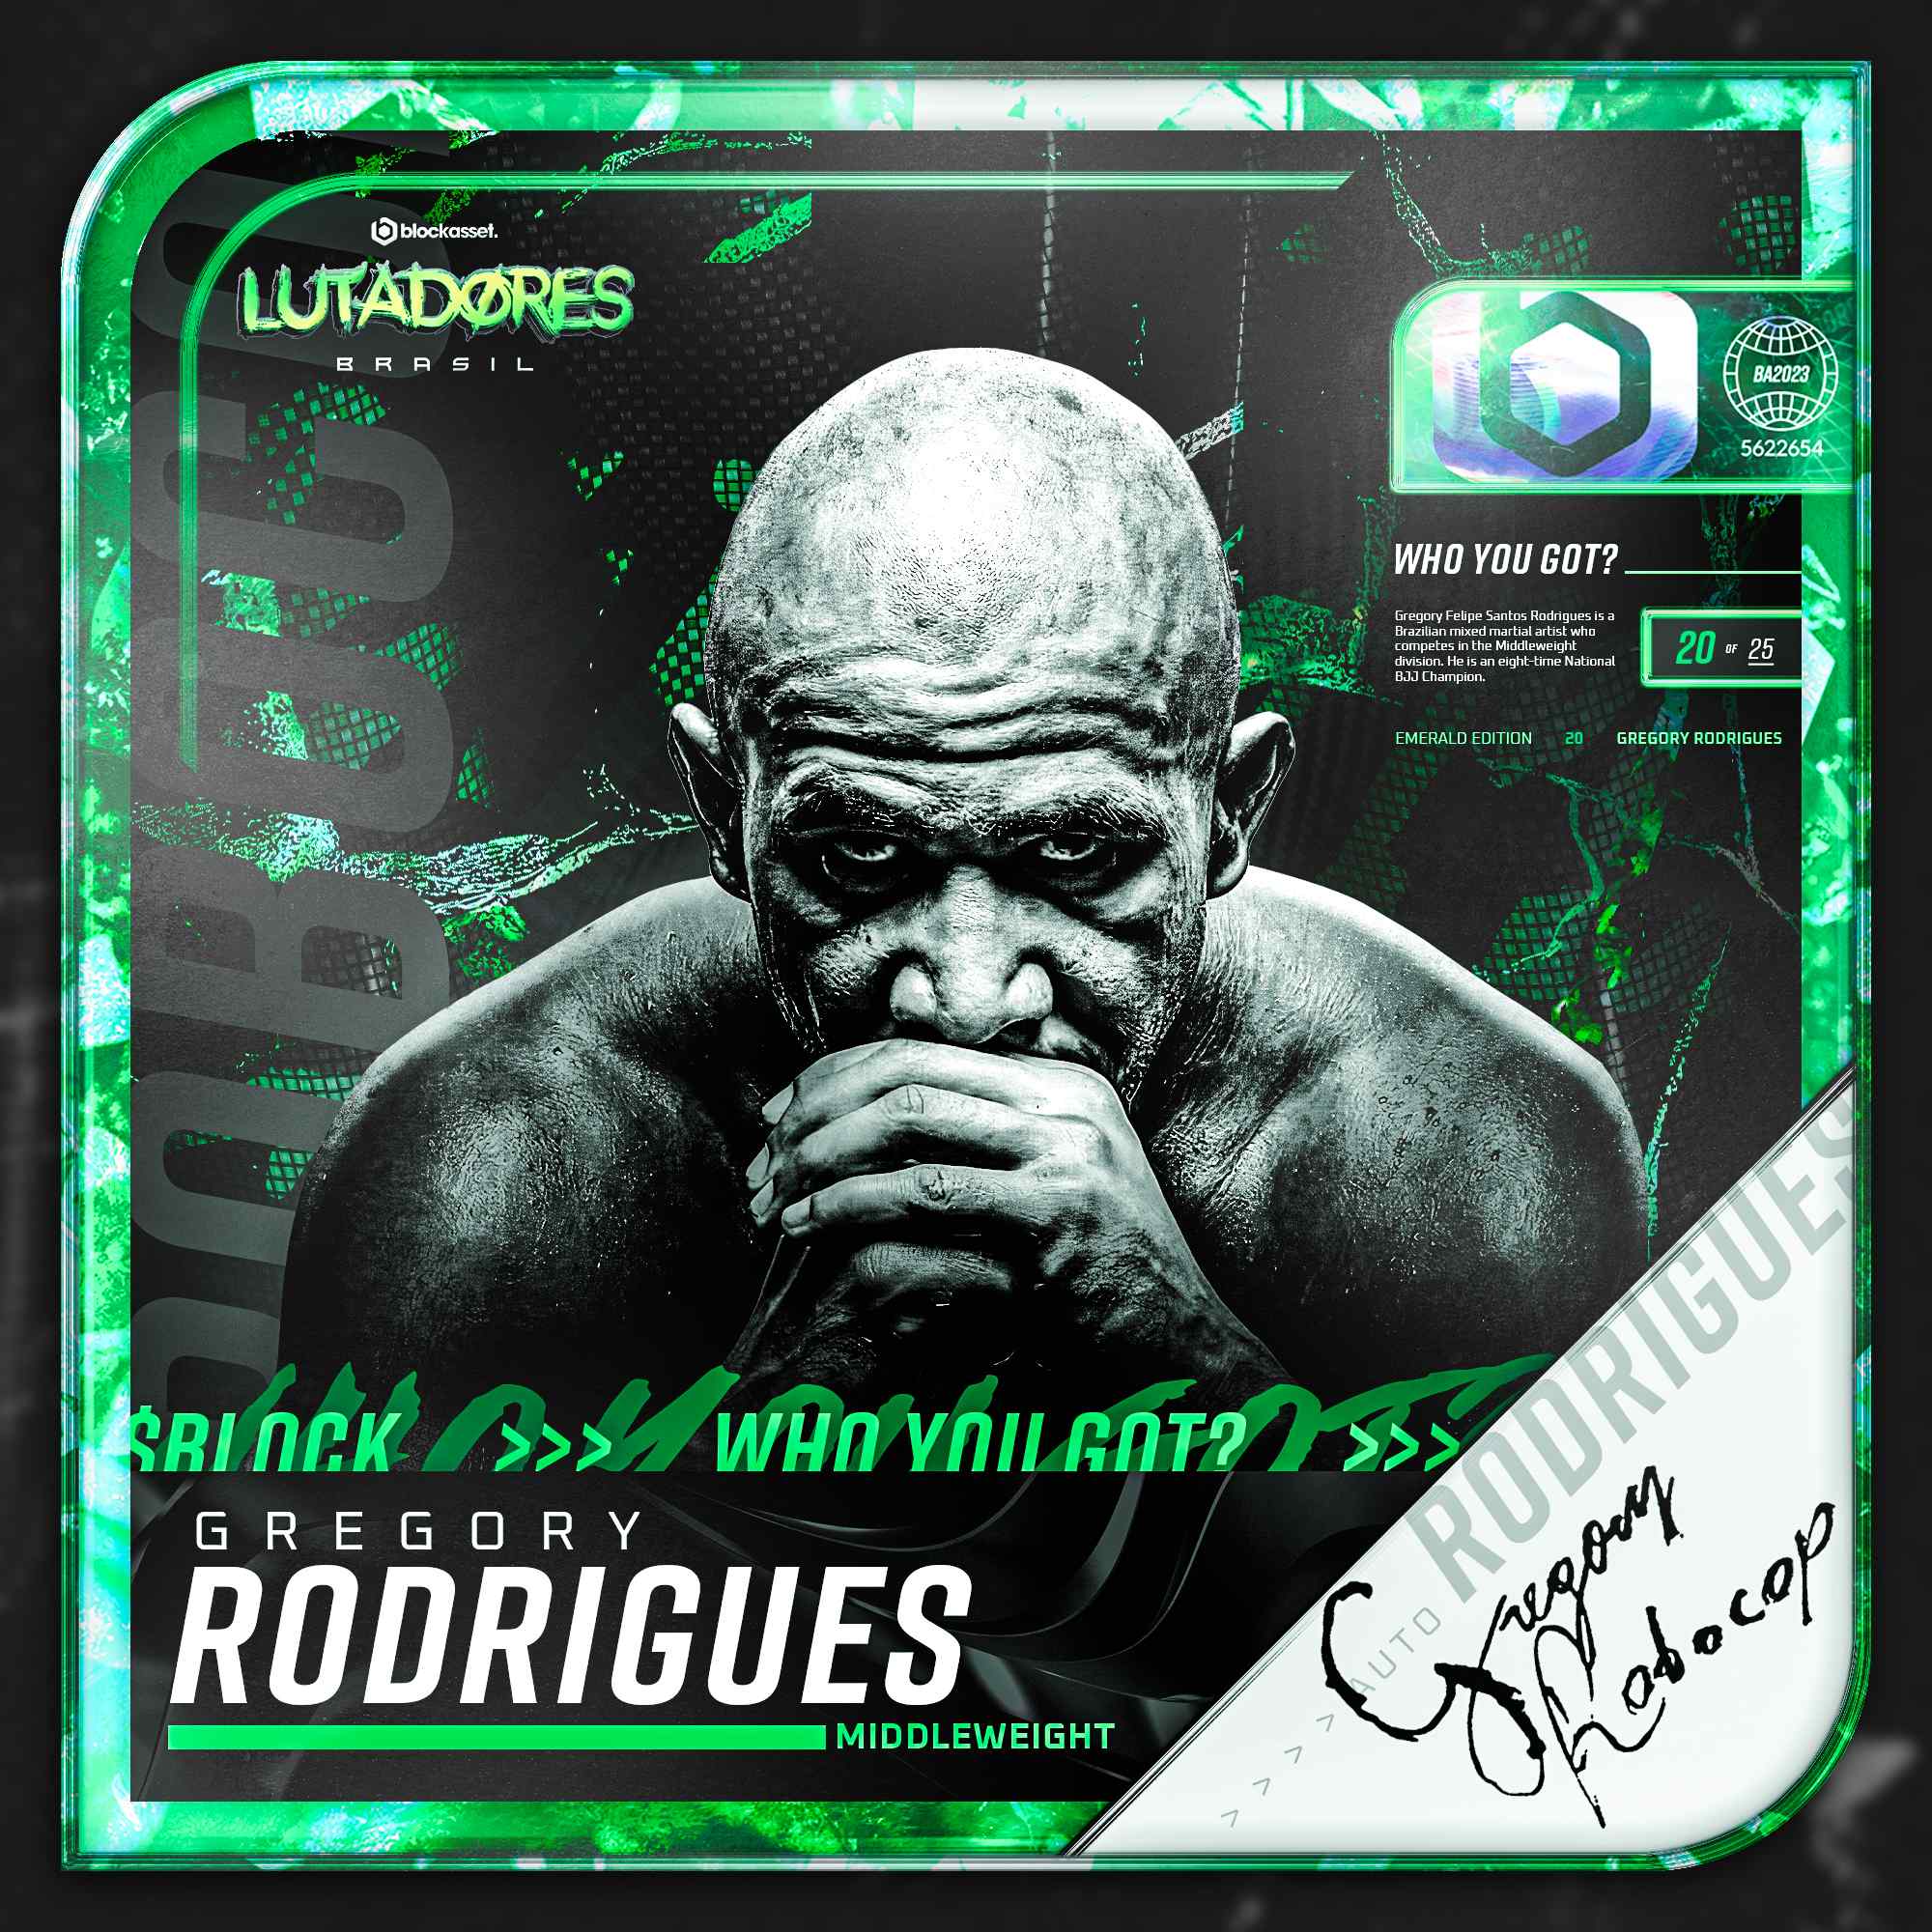 Gregory Rodrigues #020